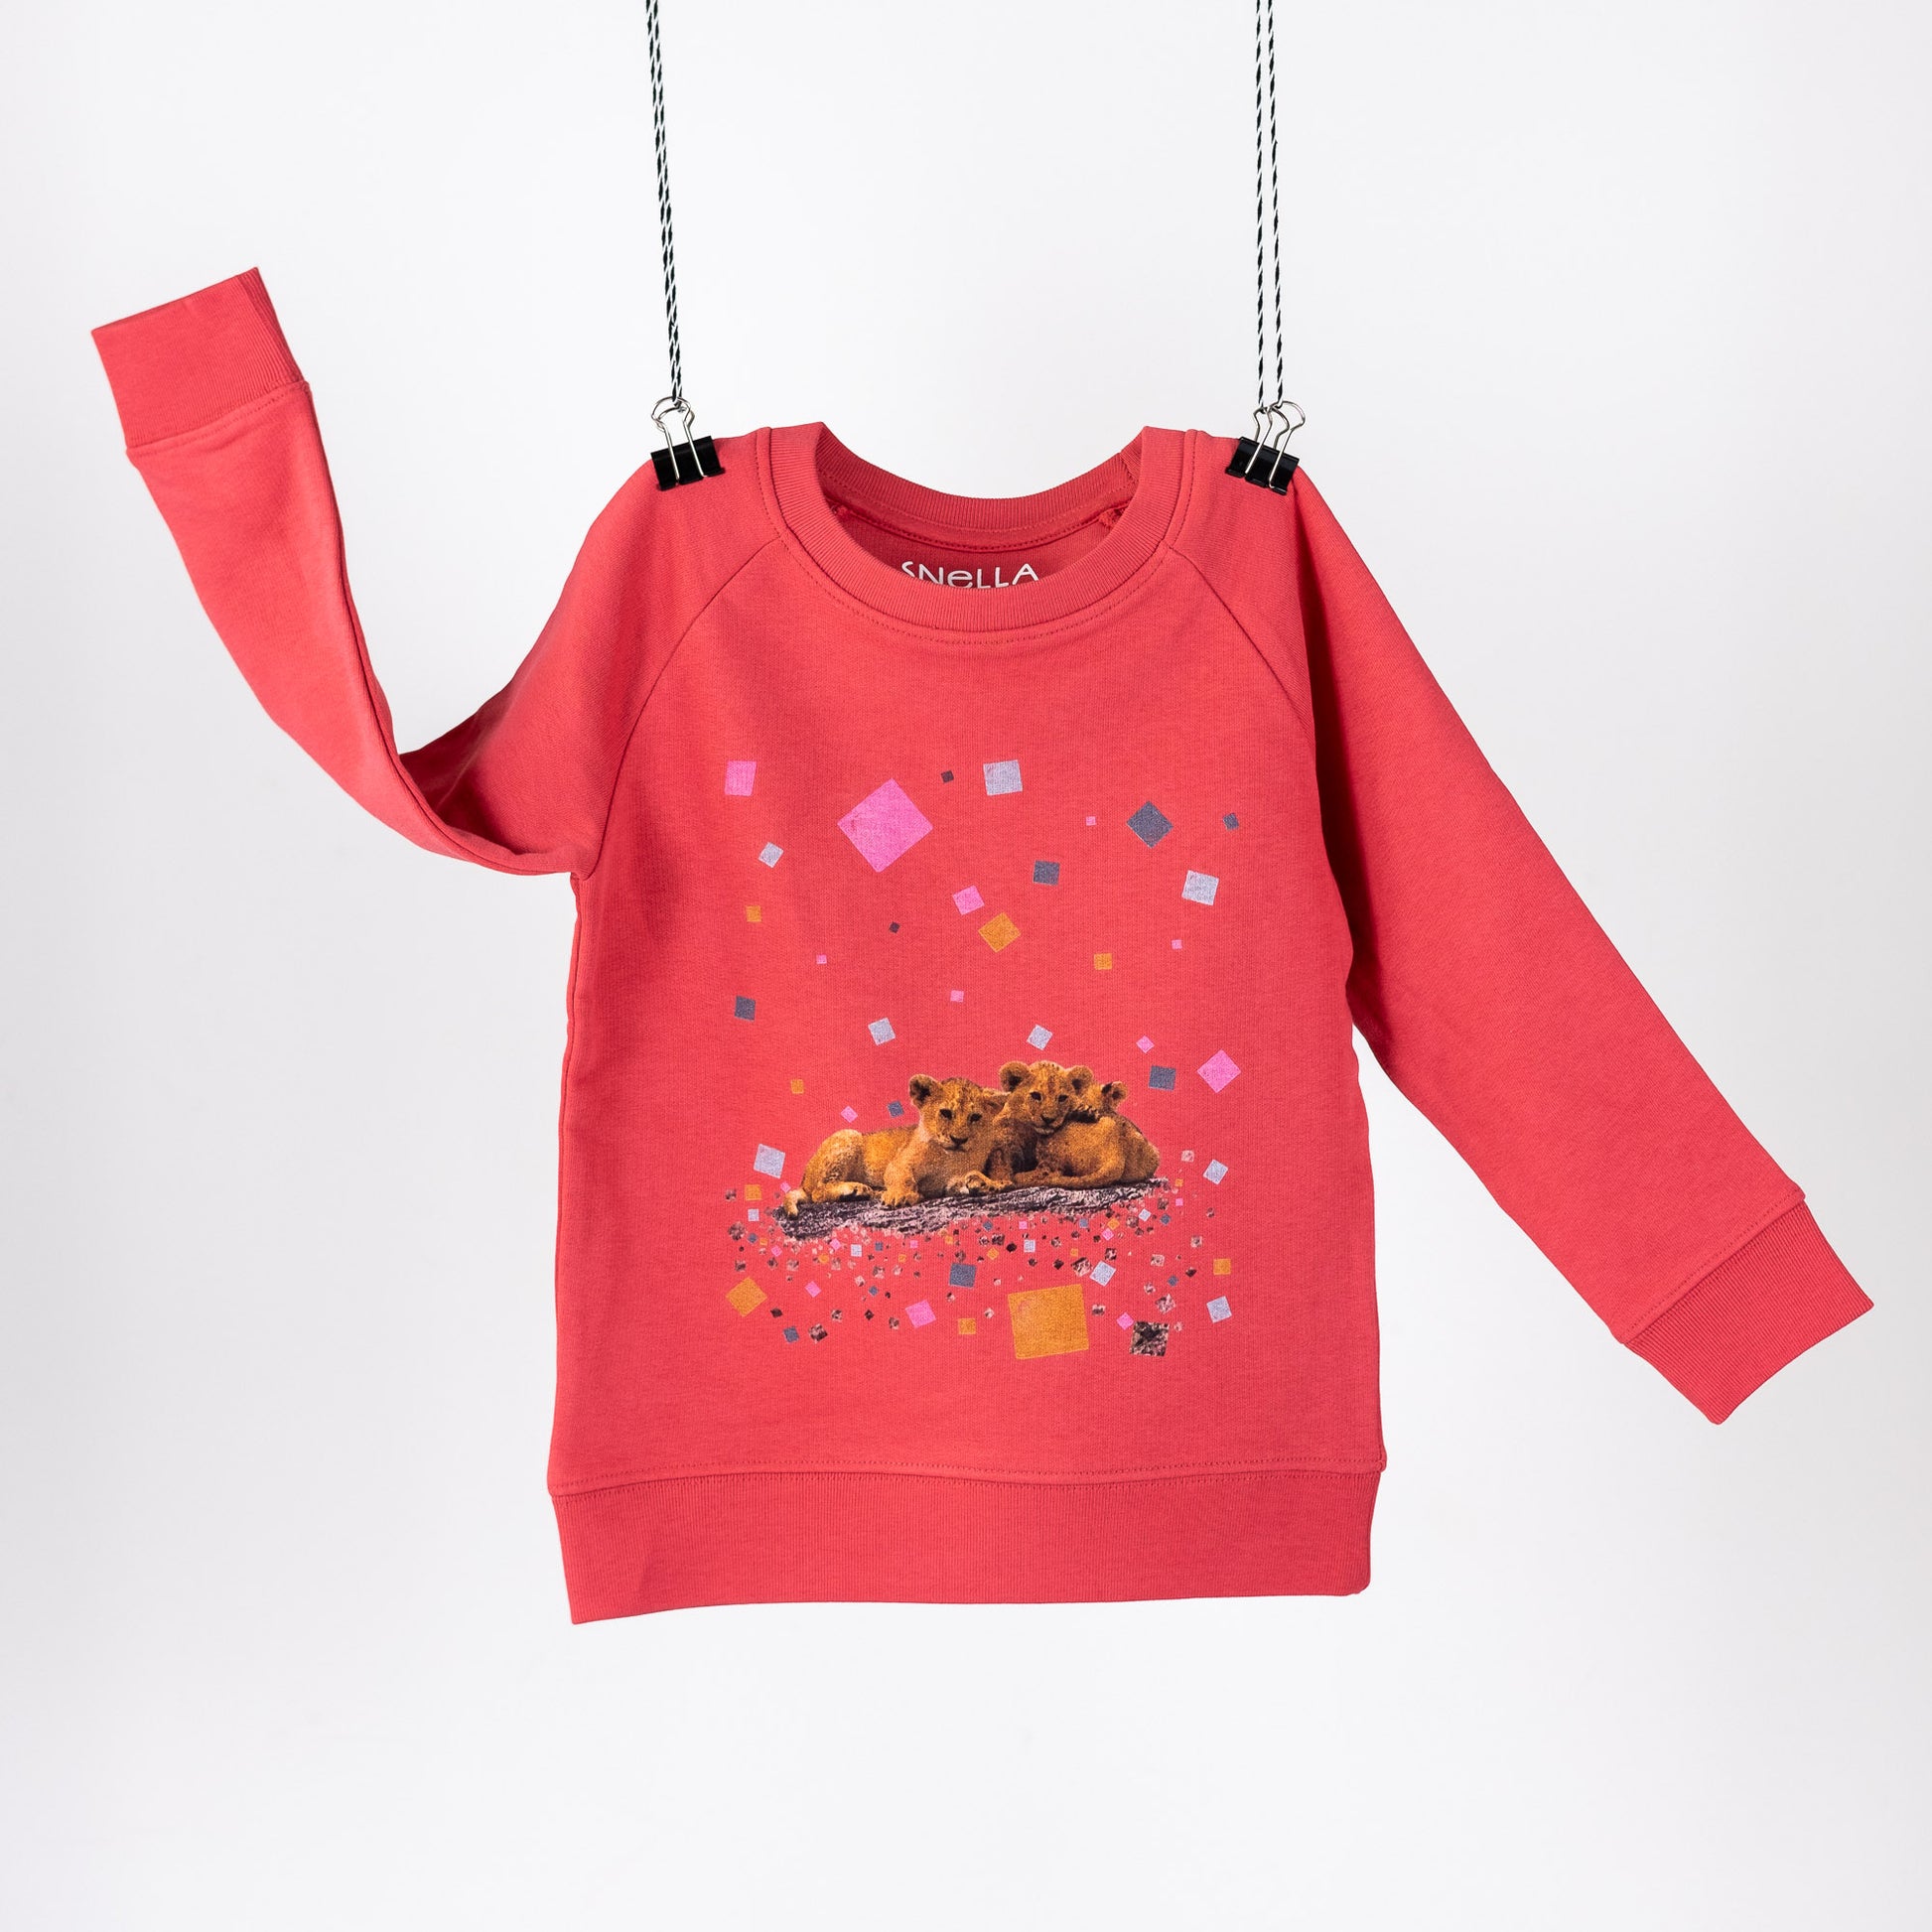 Red terry children's sweatshirt with digital print featuring lion cubs and colourful squares. Logo screen printed in neck. Front view.